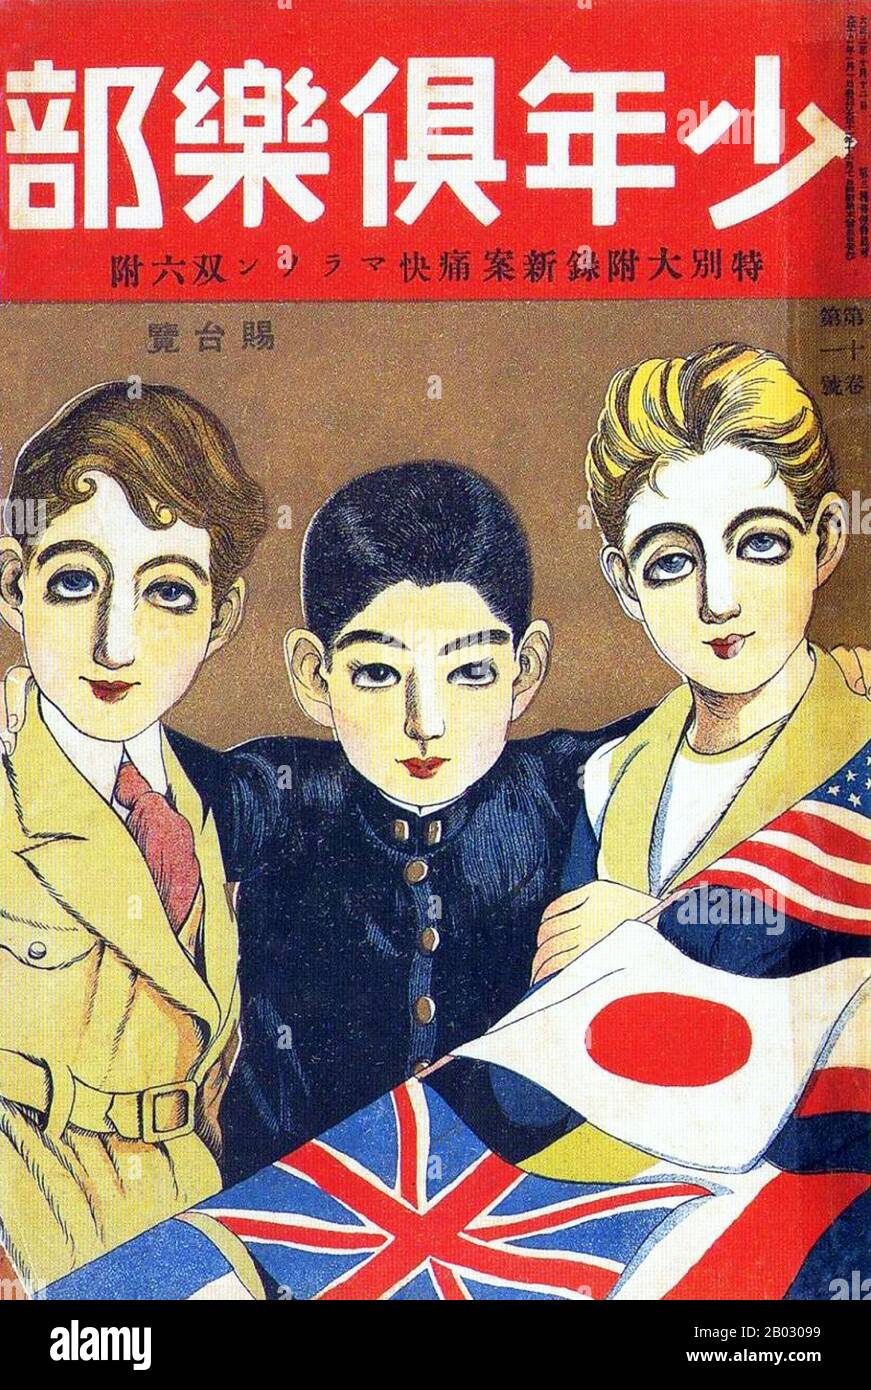 Poster art in Japan between approximately 1920 and 1945 mirrors the rapid militarisation of society and the growth of militarism, statism and fascism during the Showa Era.  In the 1920s expo poster art features elements of modern art and even Art Deco. Themes are whimsical and outward looking, representing Japan's growing importance and influence in the world of international commerce and art. By the 1930s this kind of poster art had grown much more bleak, less concerned with human themes and more directed towards statism and social control. Feminine imagery disappears to be replaced by wheels Stock Photo